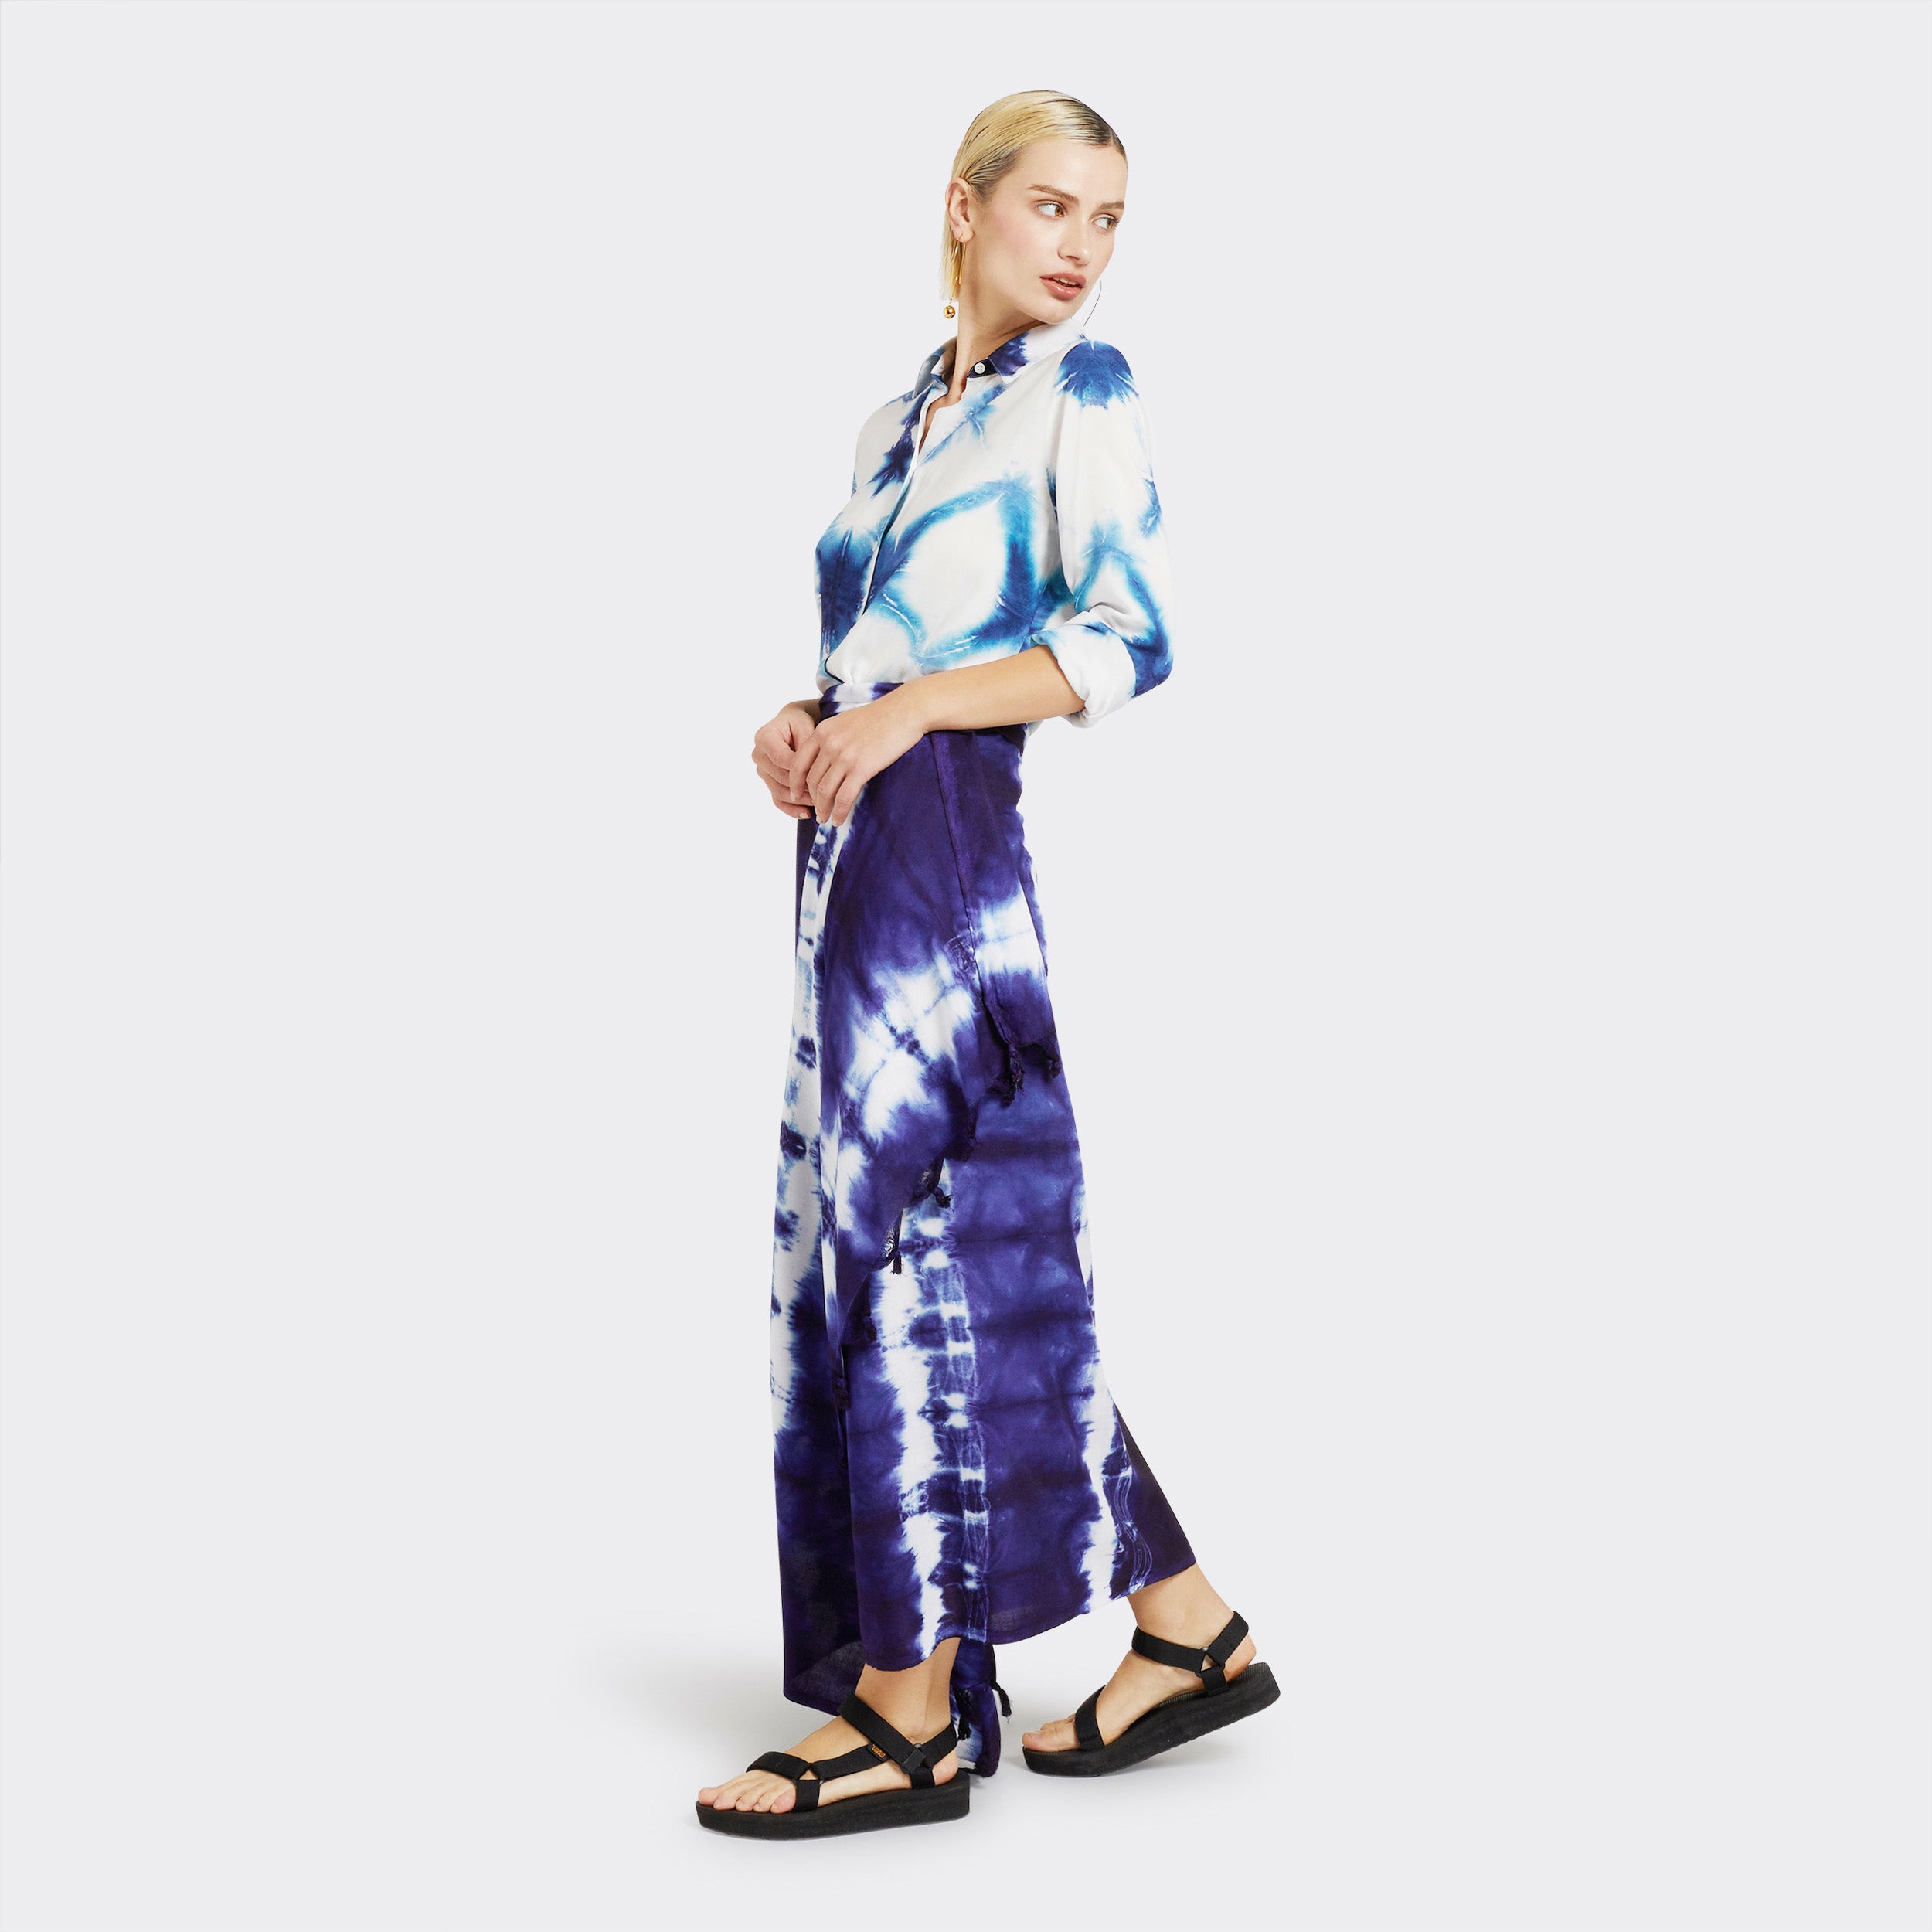 Model wears a Pareo in Tie Dye Soft Blue as a skirt with the Shirt in Tie Dye White and Blue.